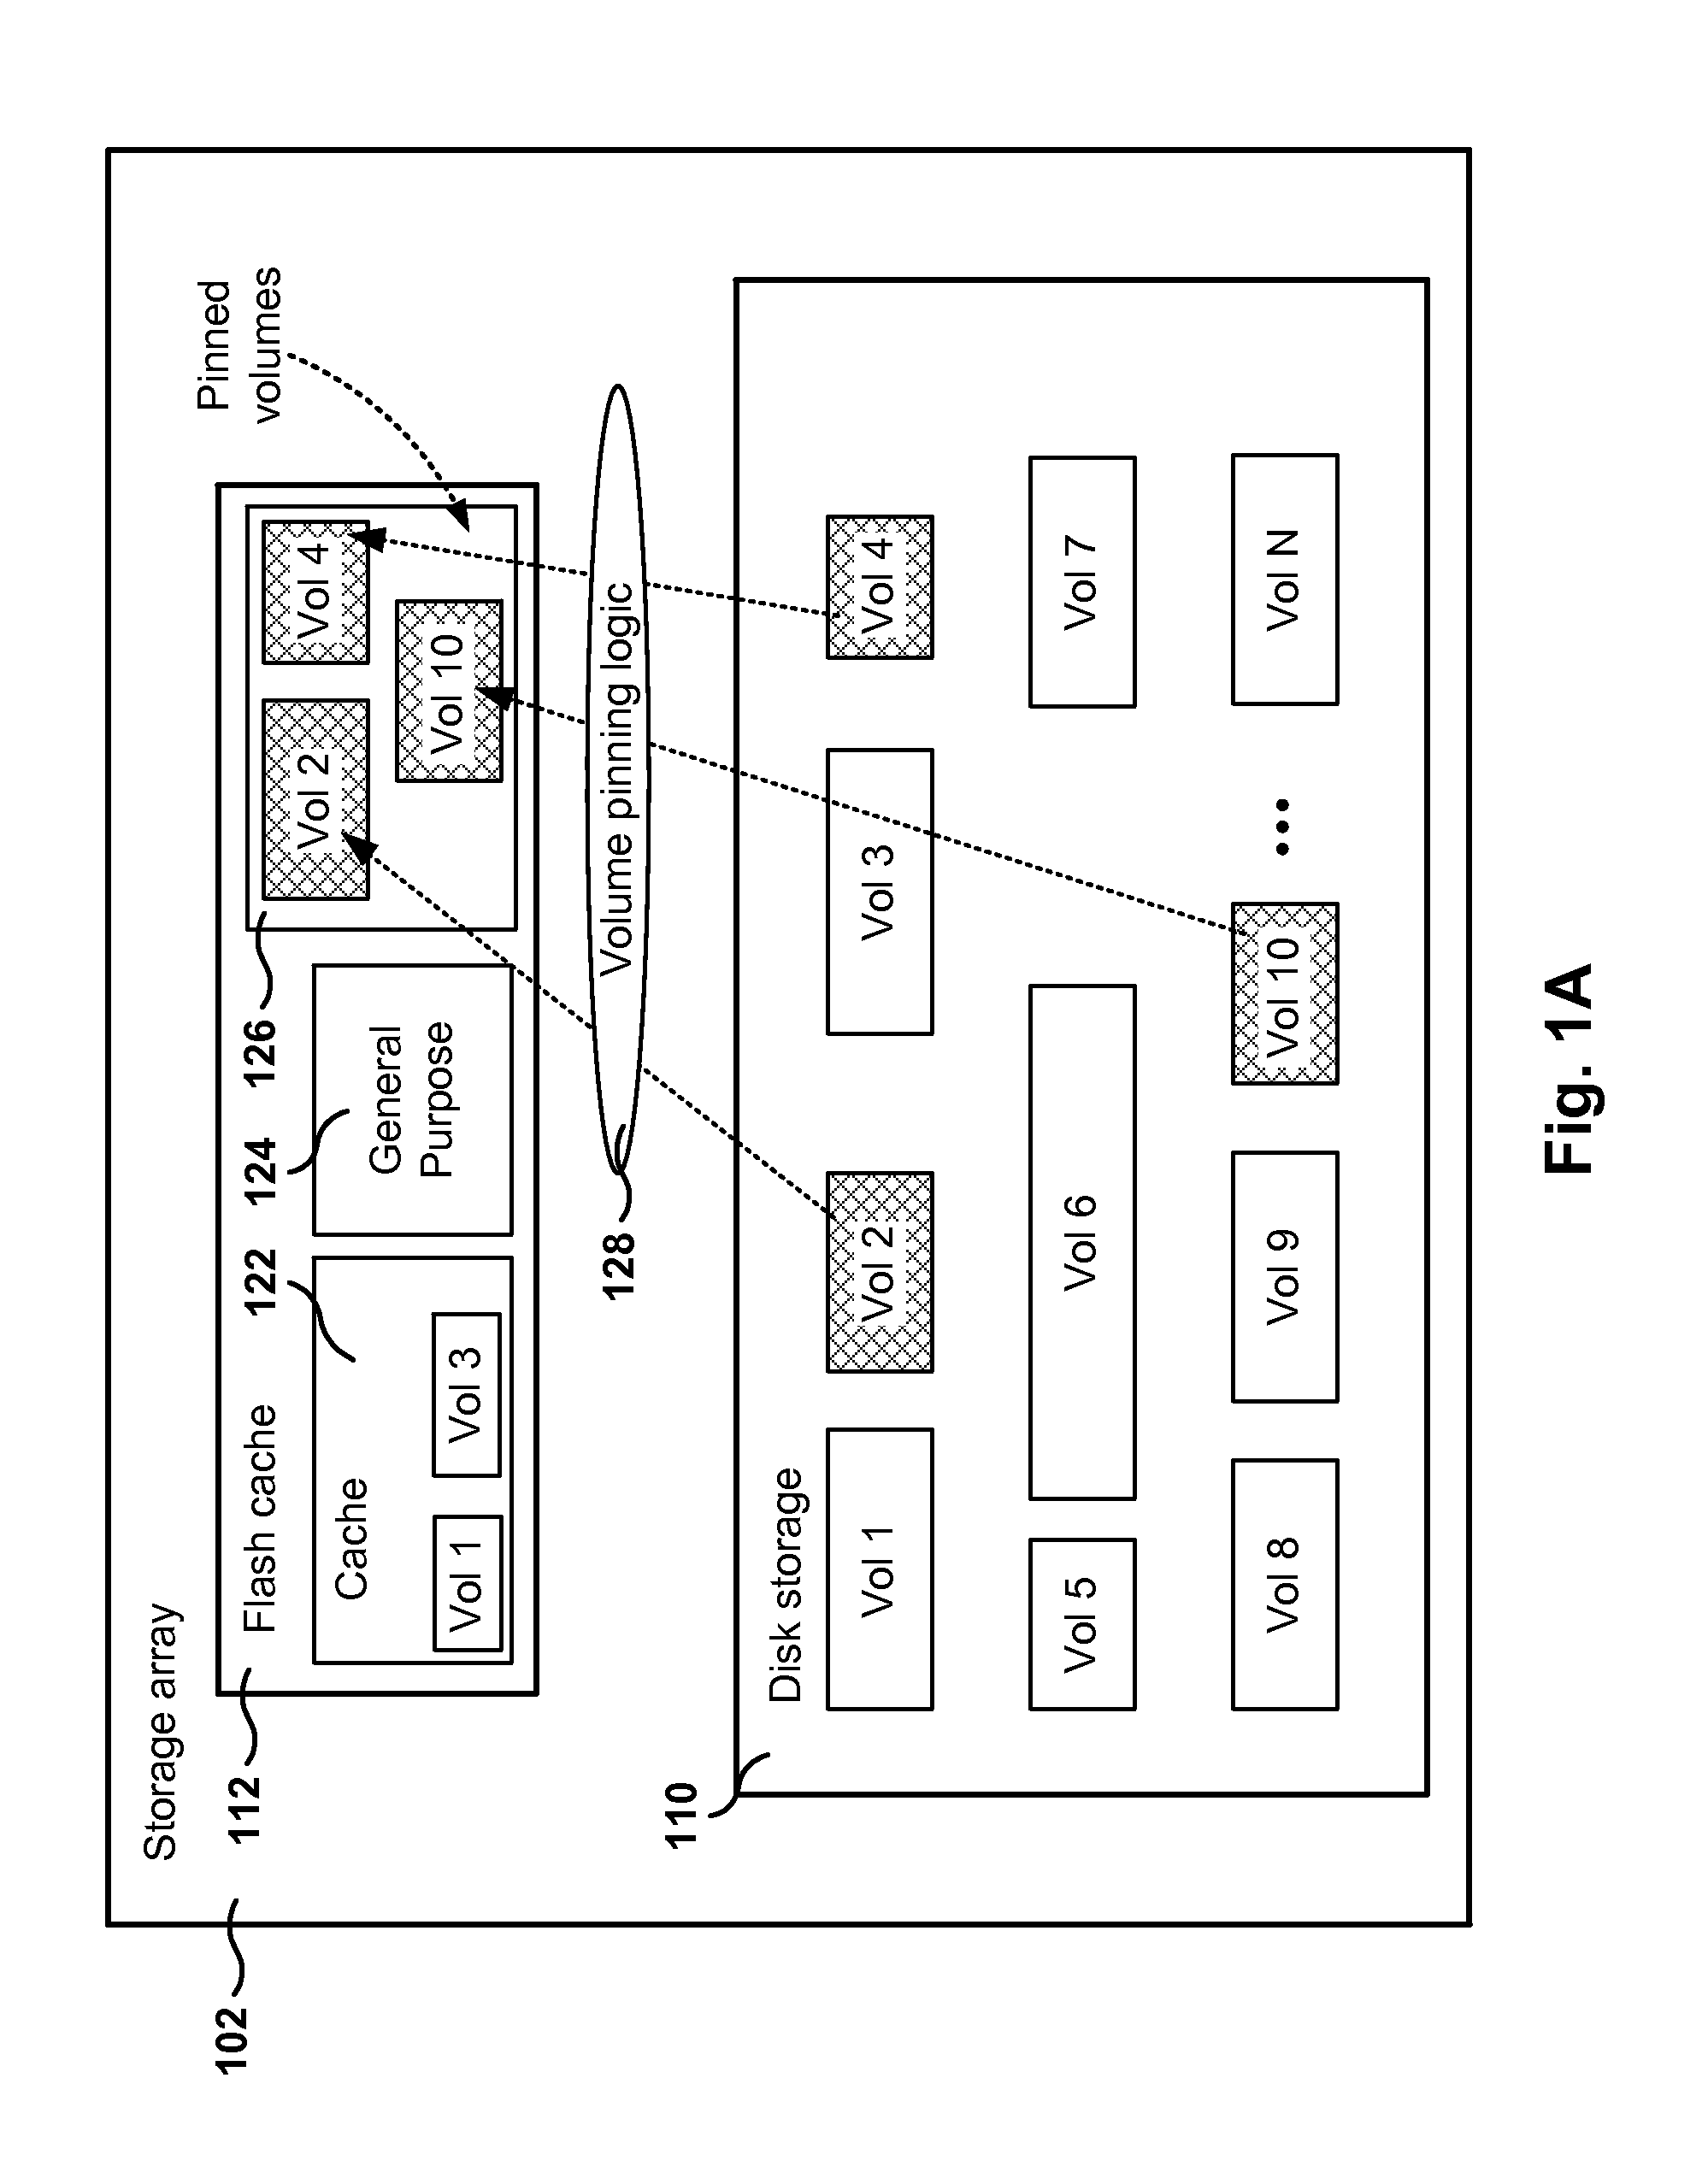 Management of pinned storage in flash based on flash-to-disk capacity ratio